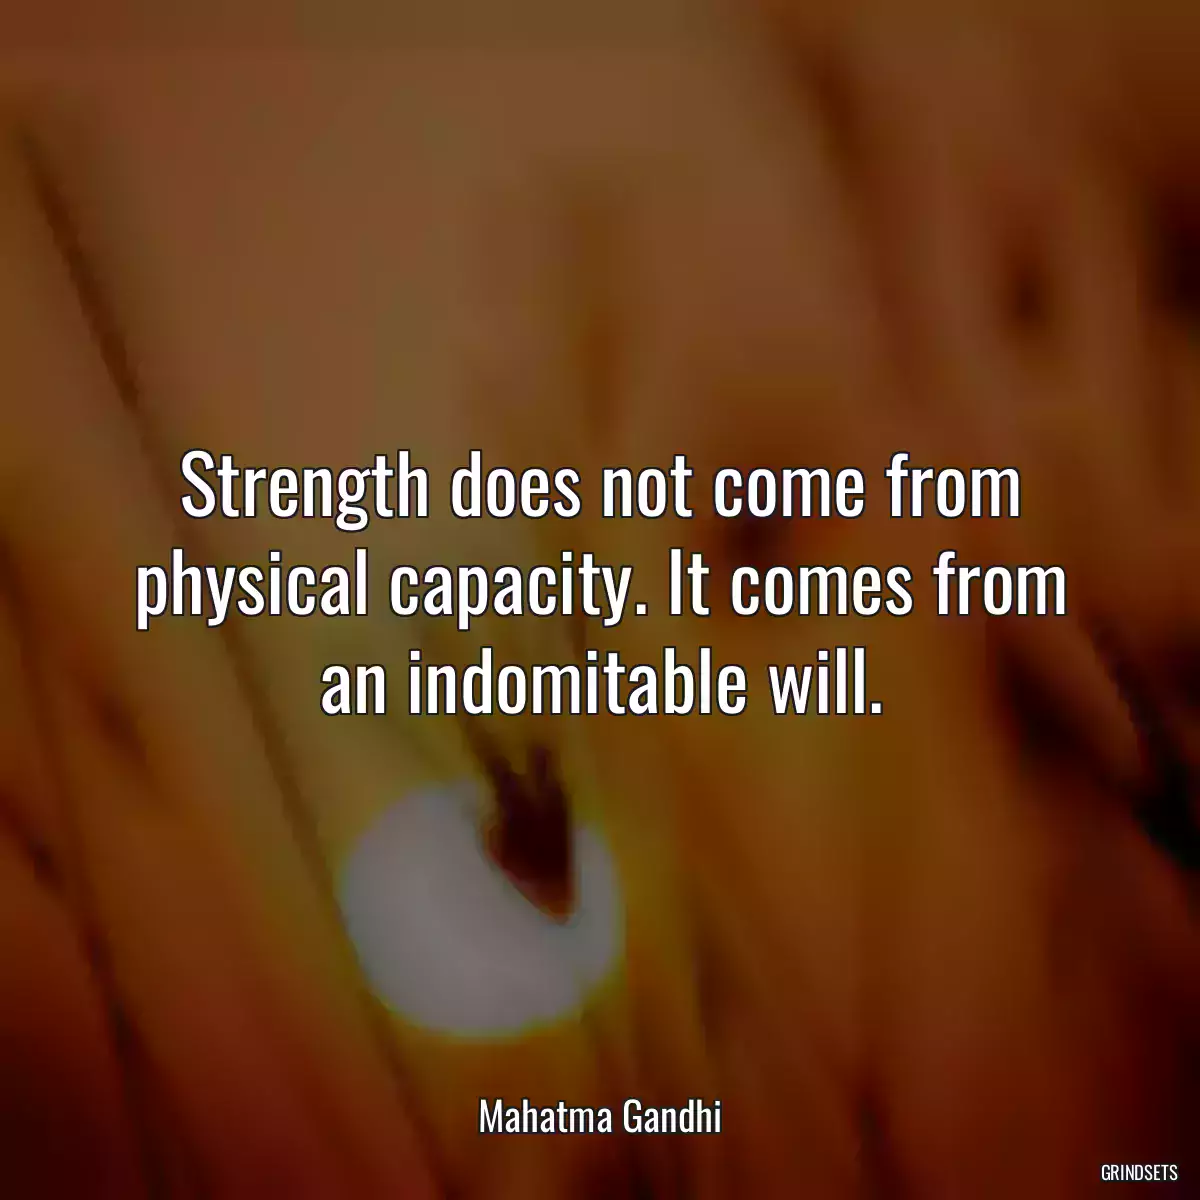 Strength does not come from physical capacity. It comes from an indomitable will.